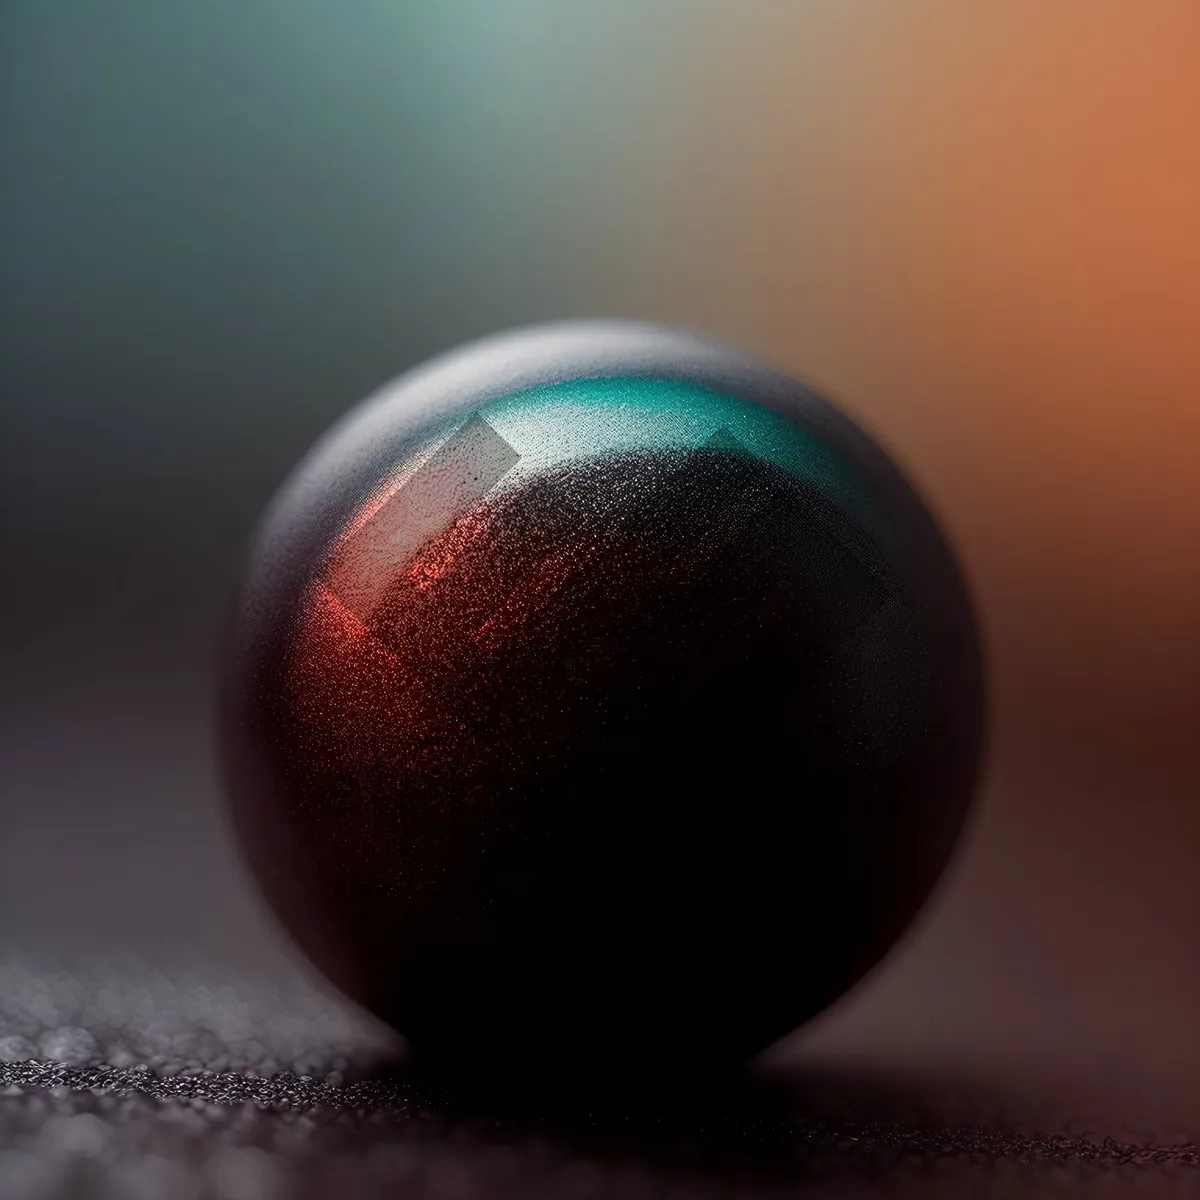 Picture of Colorful Electronic Trackball Device: Playful Ball of Round Innovation